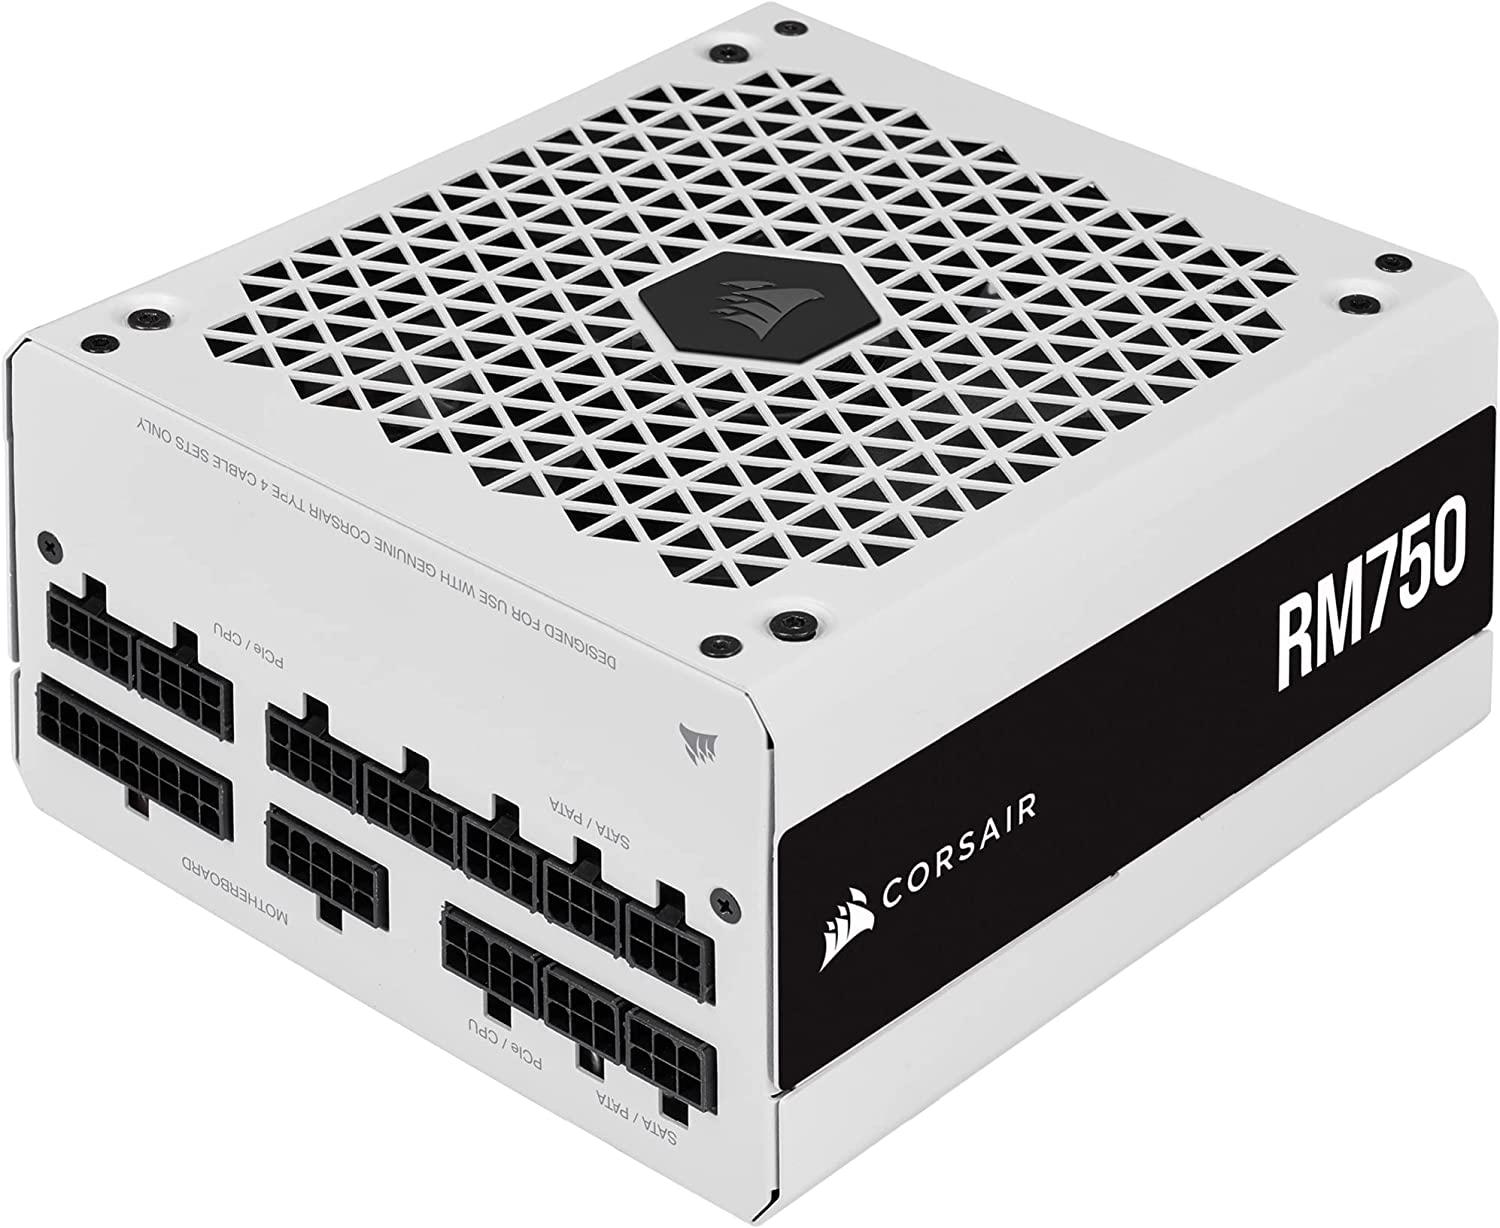 Corsair RM750 750W 80 Plus Gold PSU Power Supply for $83.03 Shipped